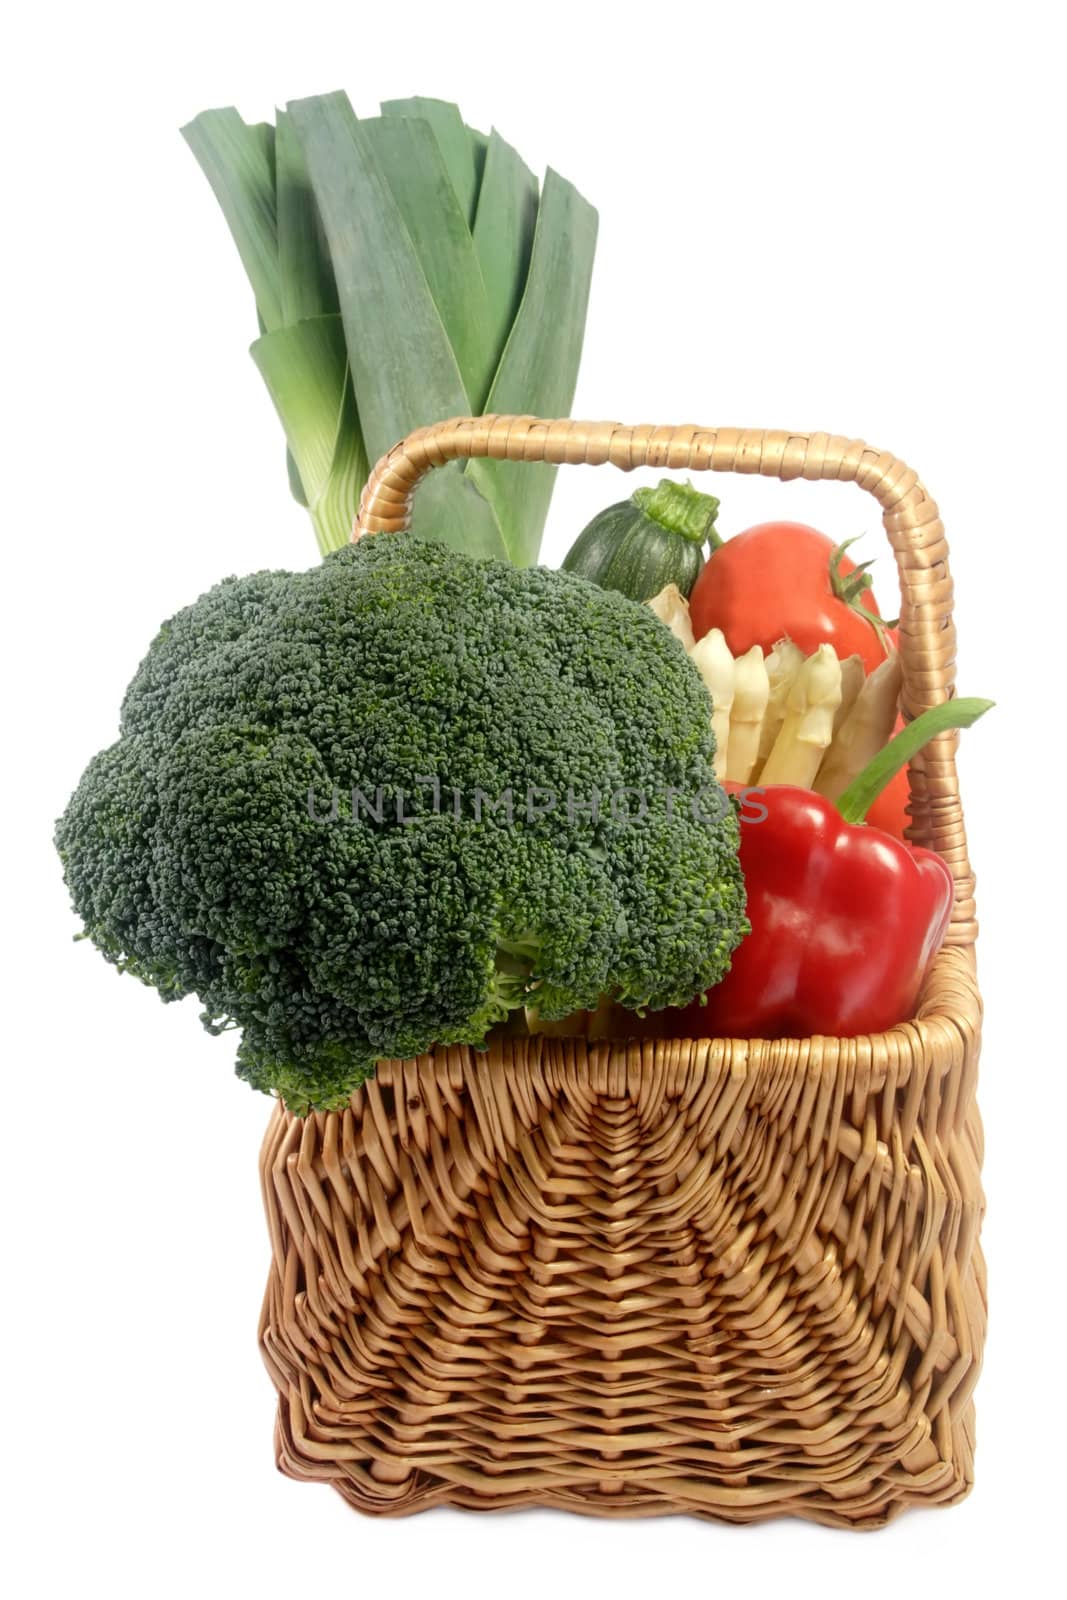 Different sorts of vegetables in a basket - isolated on white background